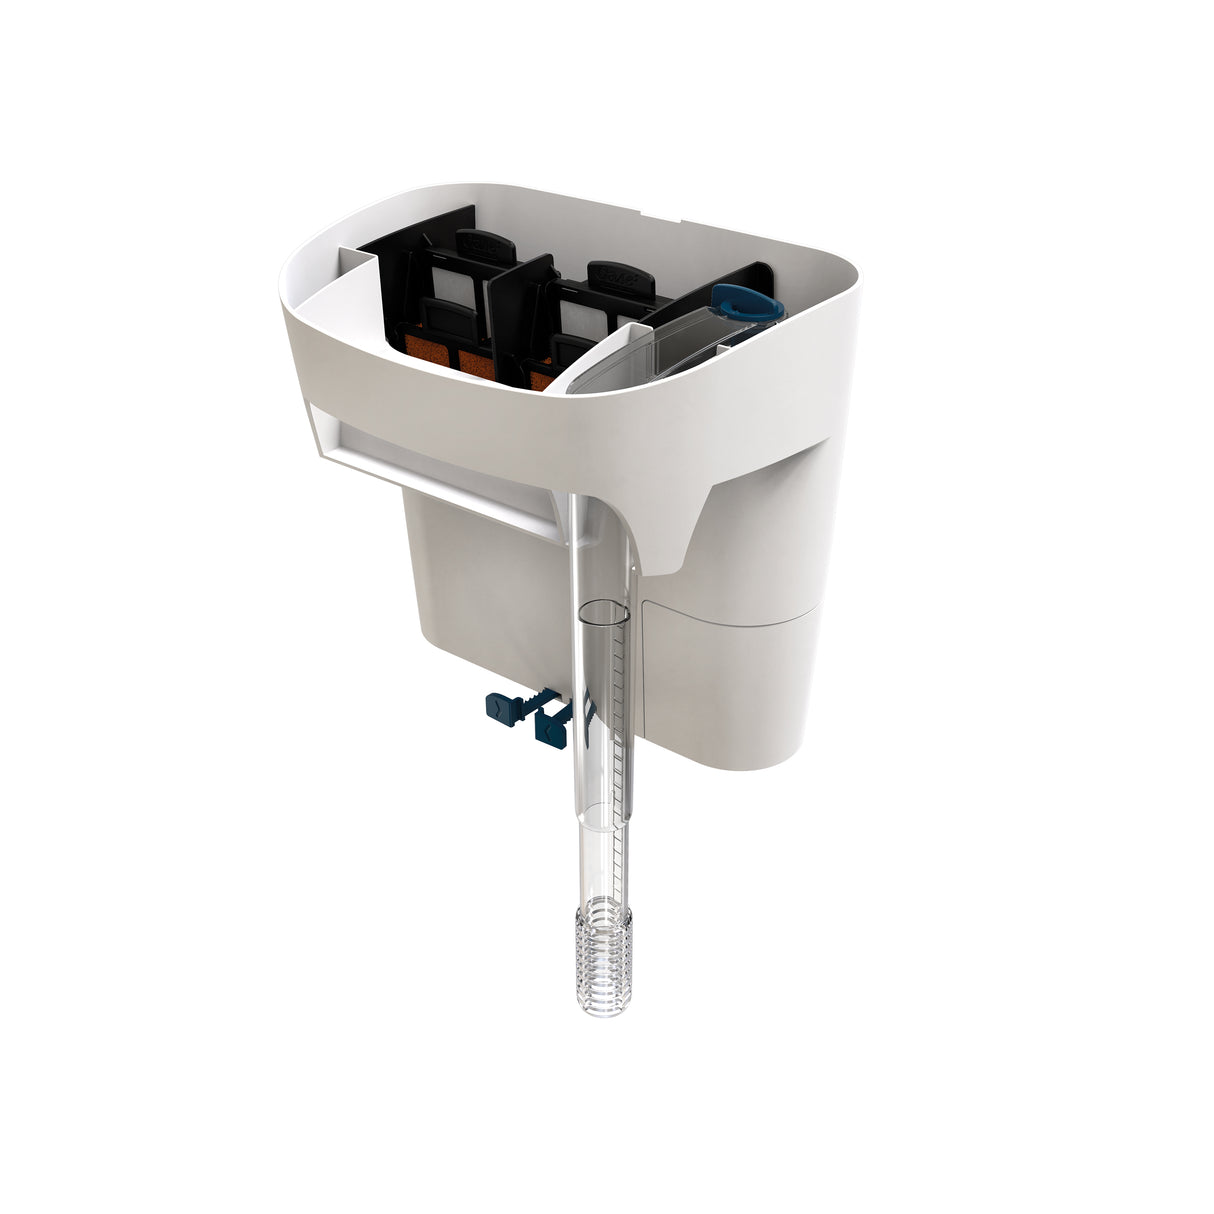 OASE BioStyle 30 White features multi-stage filtration